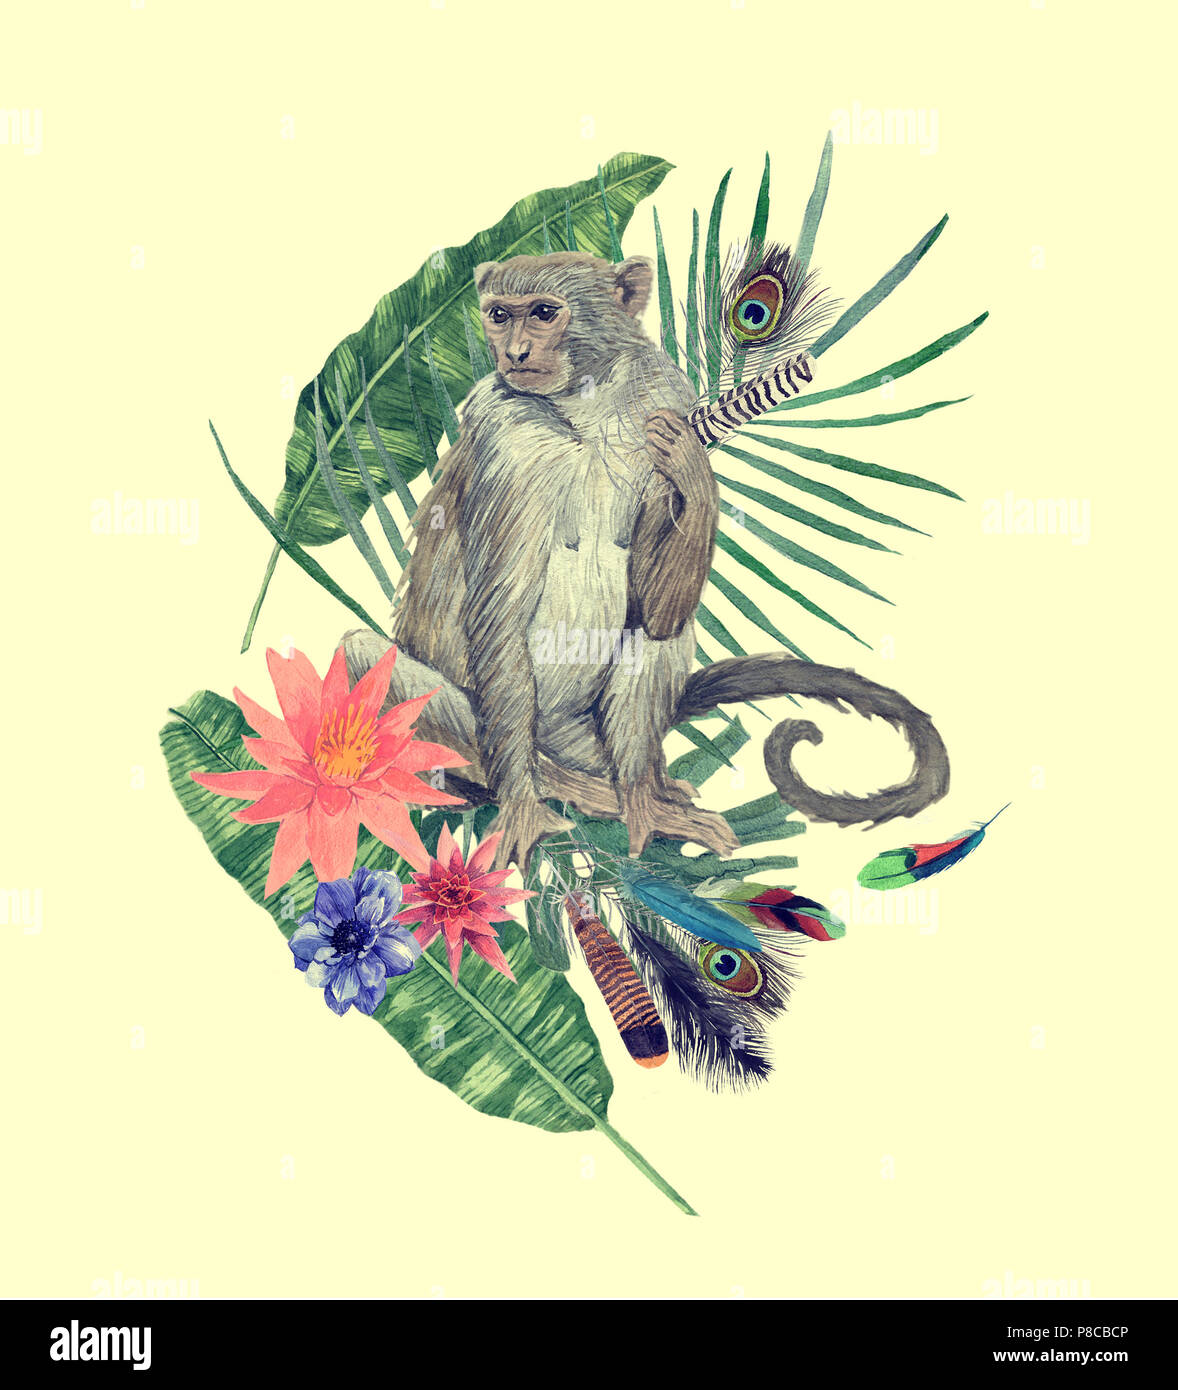 Watercolor hand drawn illustration with monkey, leaves, flowers, feathers. Stock Photo